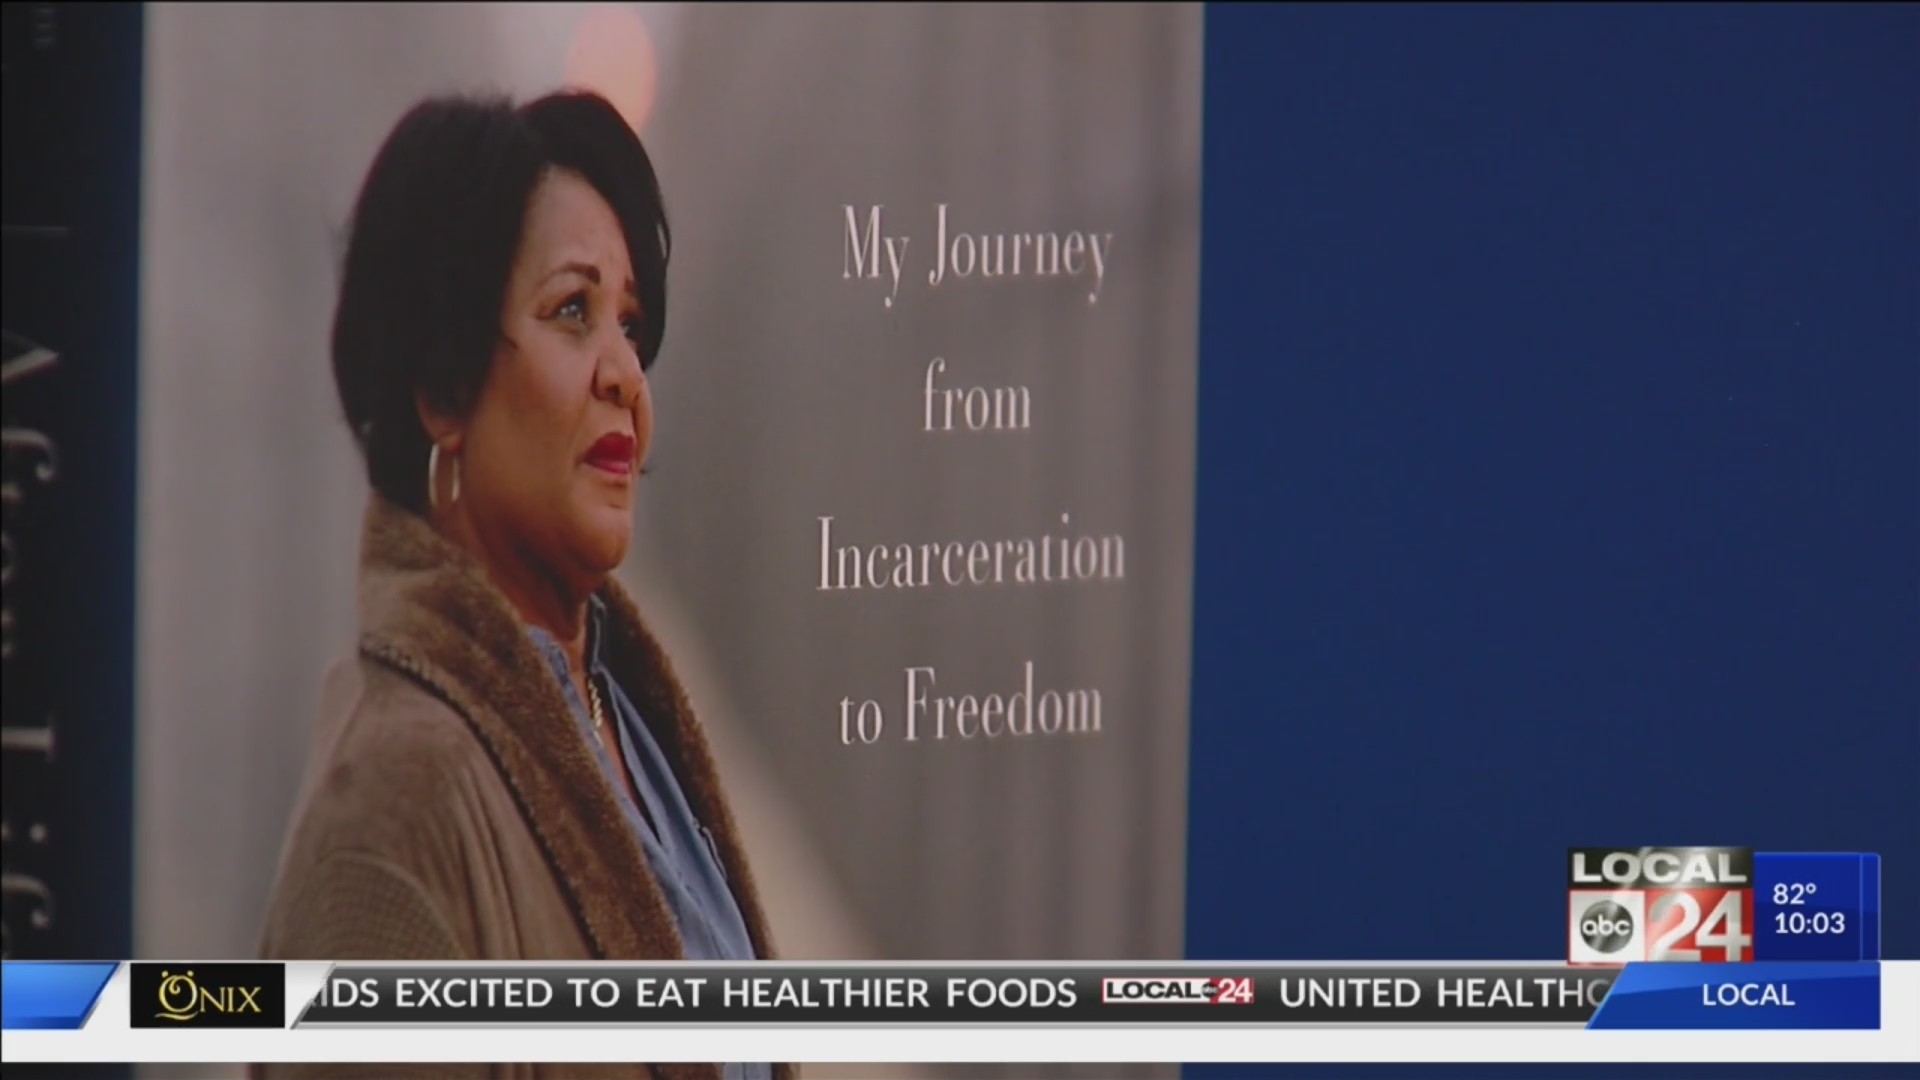 After getting Presidential clemency for her life sentence, a Memphis woman is telling her story through a new book